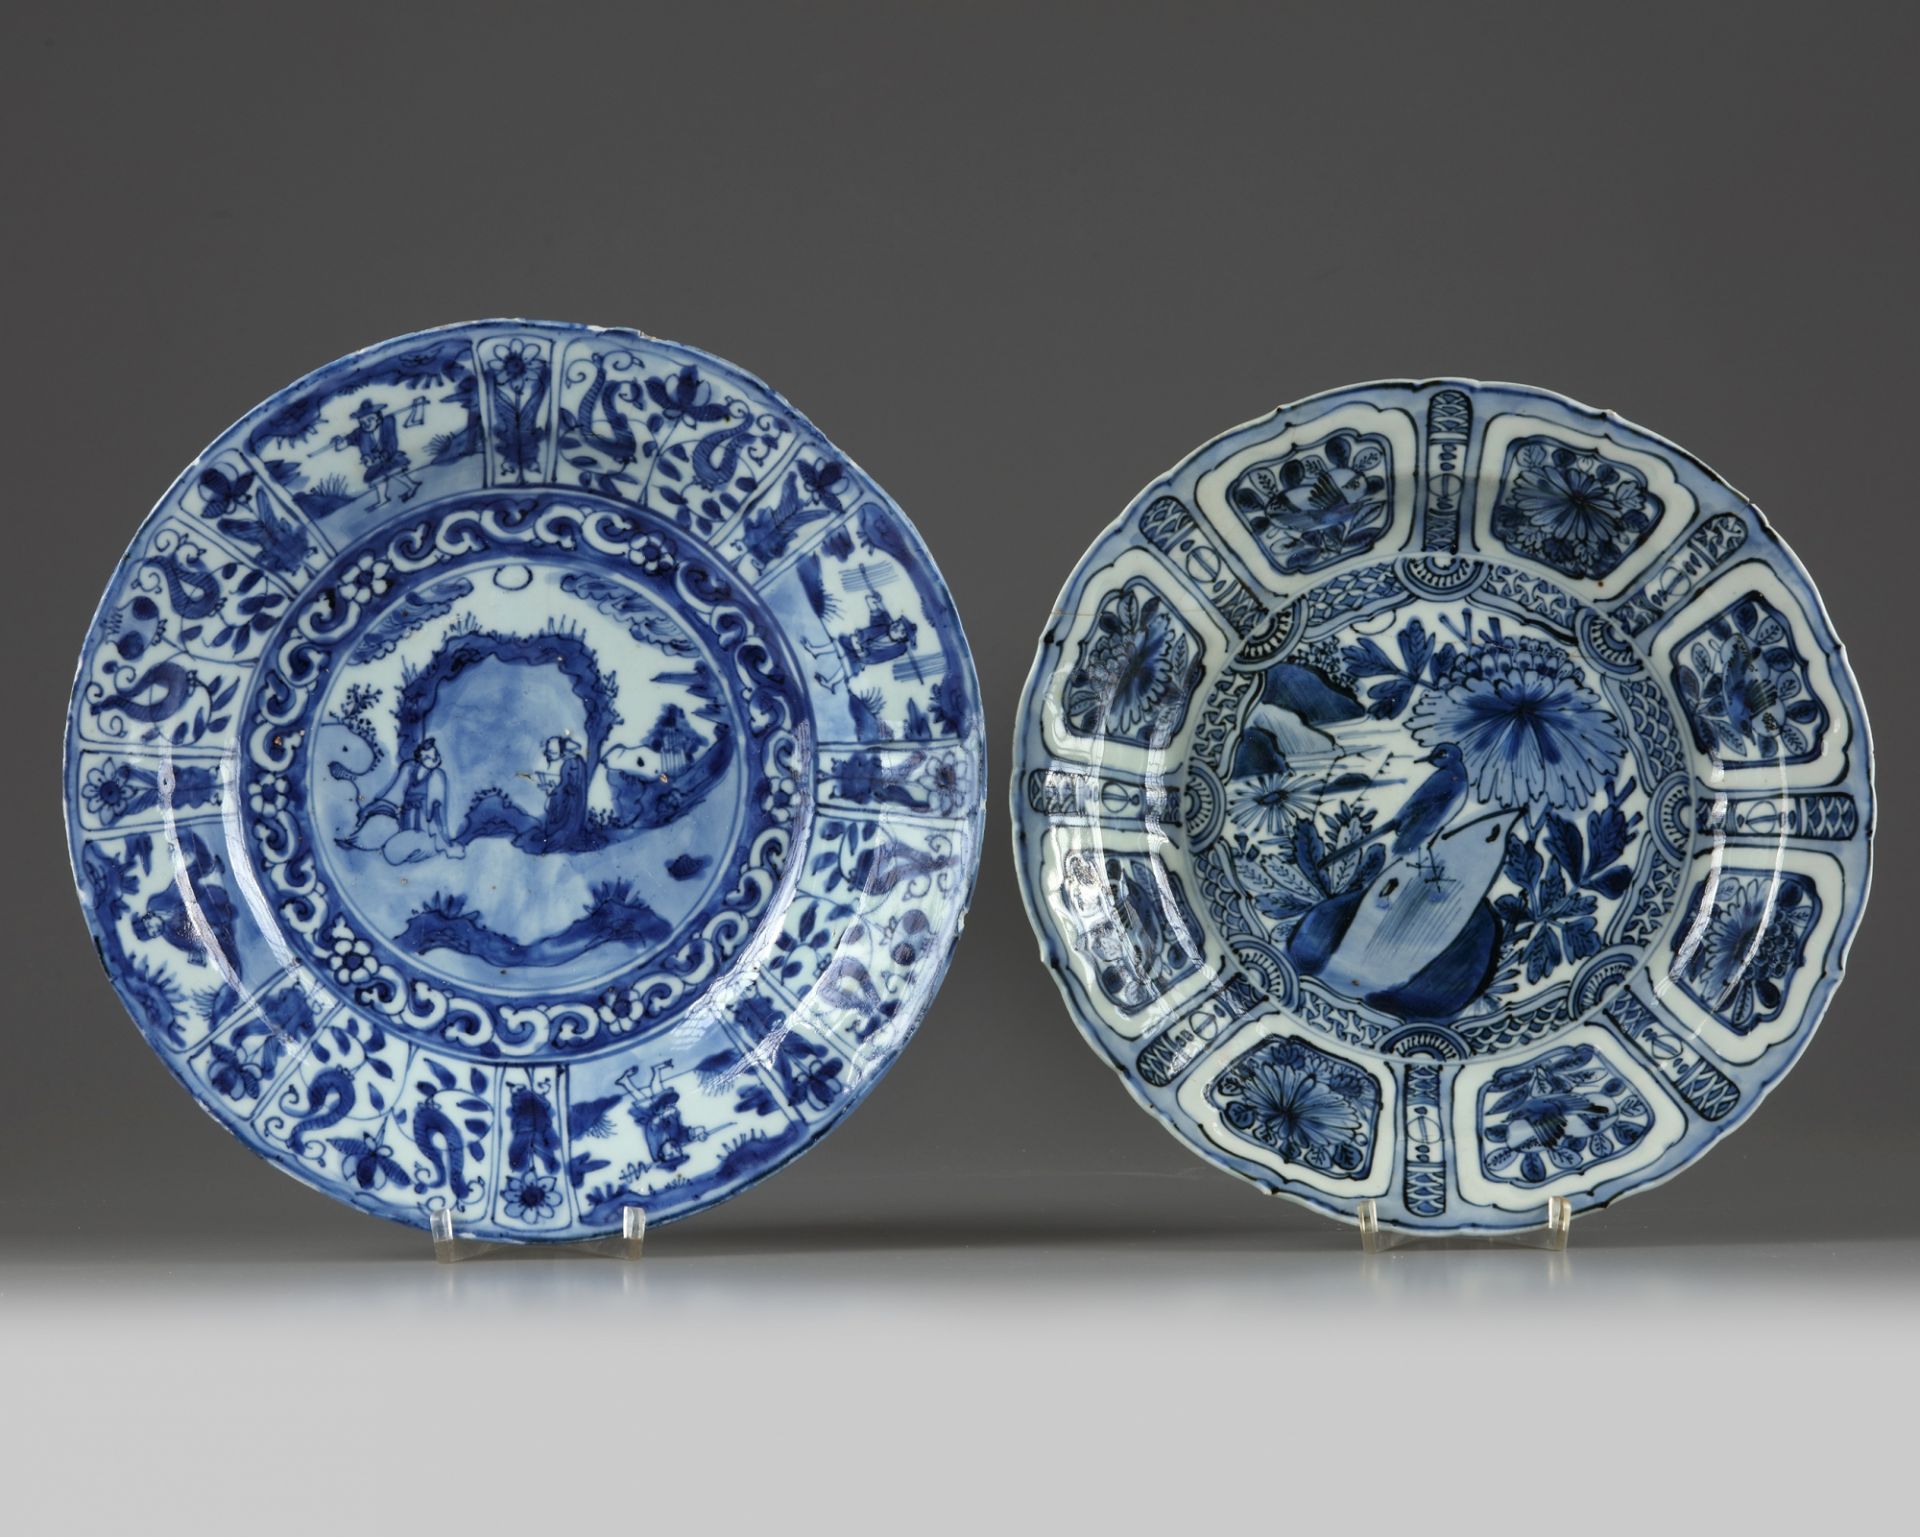 Two Chinese ‘Kraak porcelain’ dishes